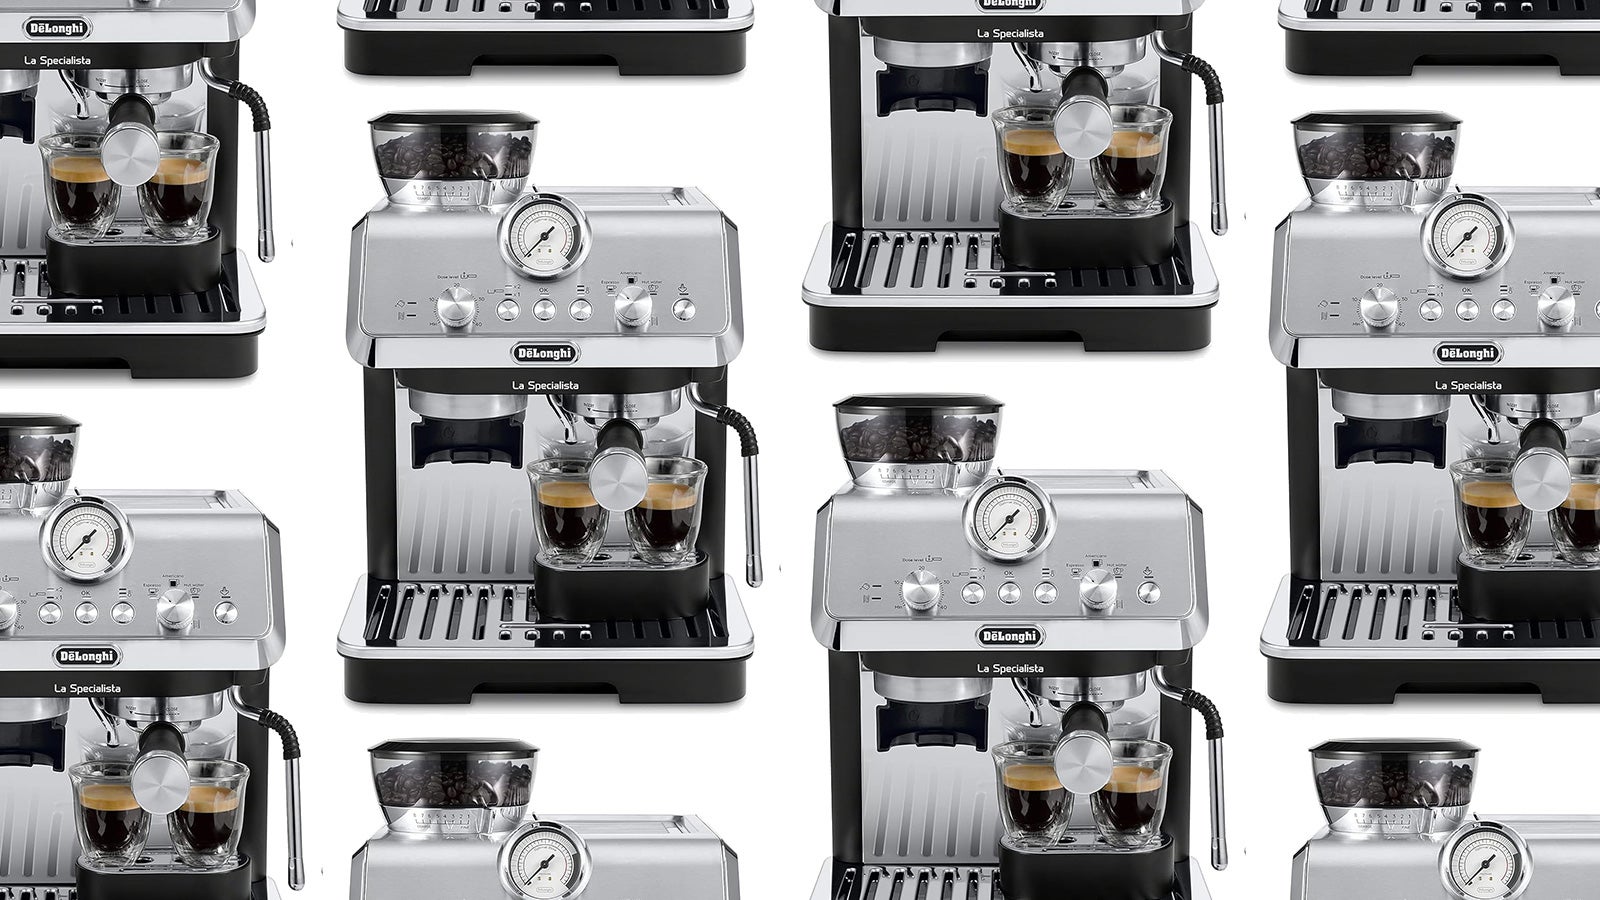 Splurge and save $200 on this high-end De'Longhi espresso machine with  grinder and milk frother